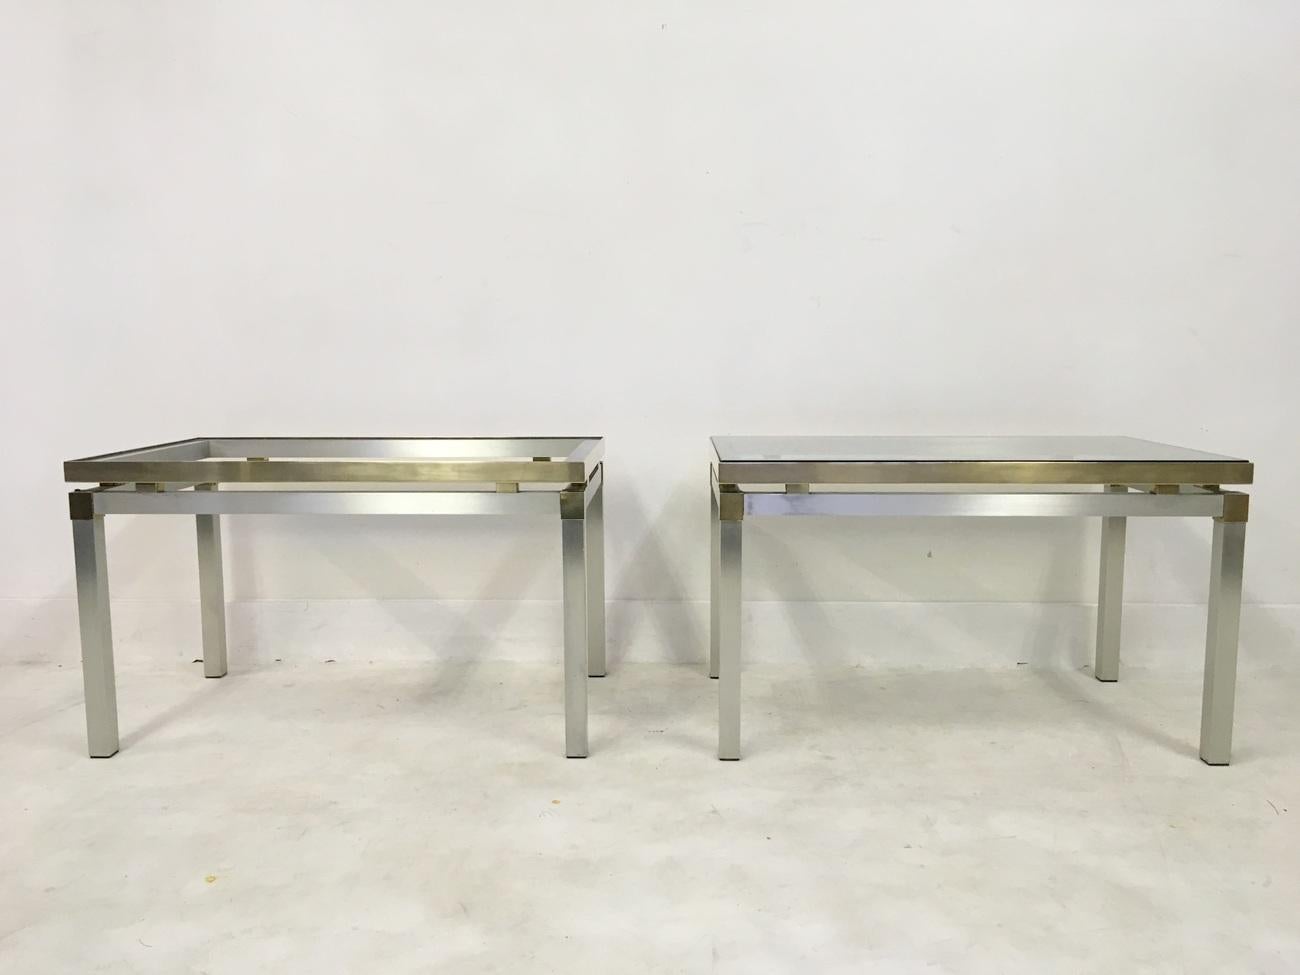 A pair of bedside tables
Brushed aluminium
Brass rim and corners
Very good quality
Probably Italian,
1970s
Polished.